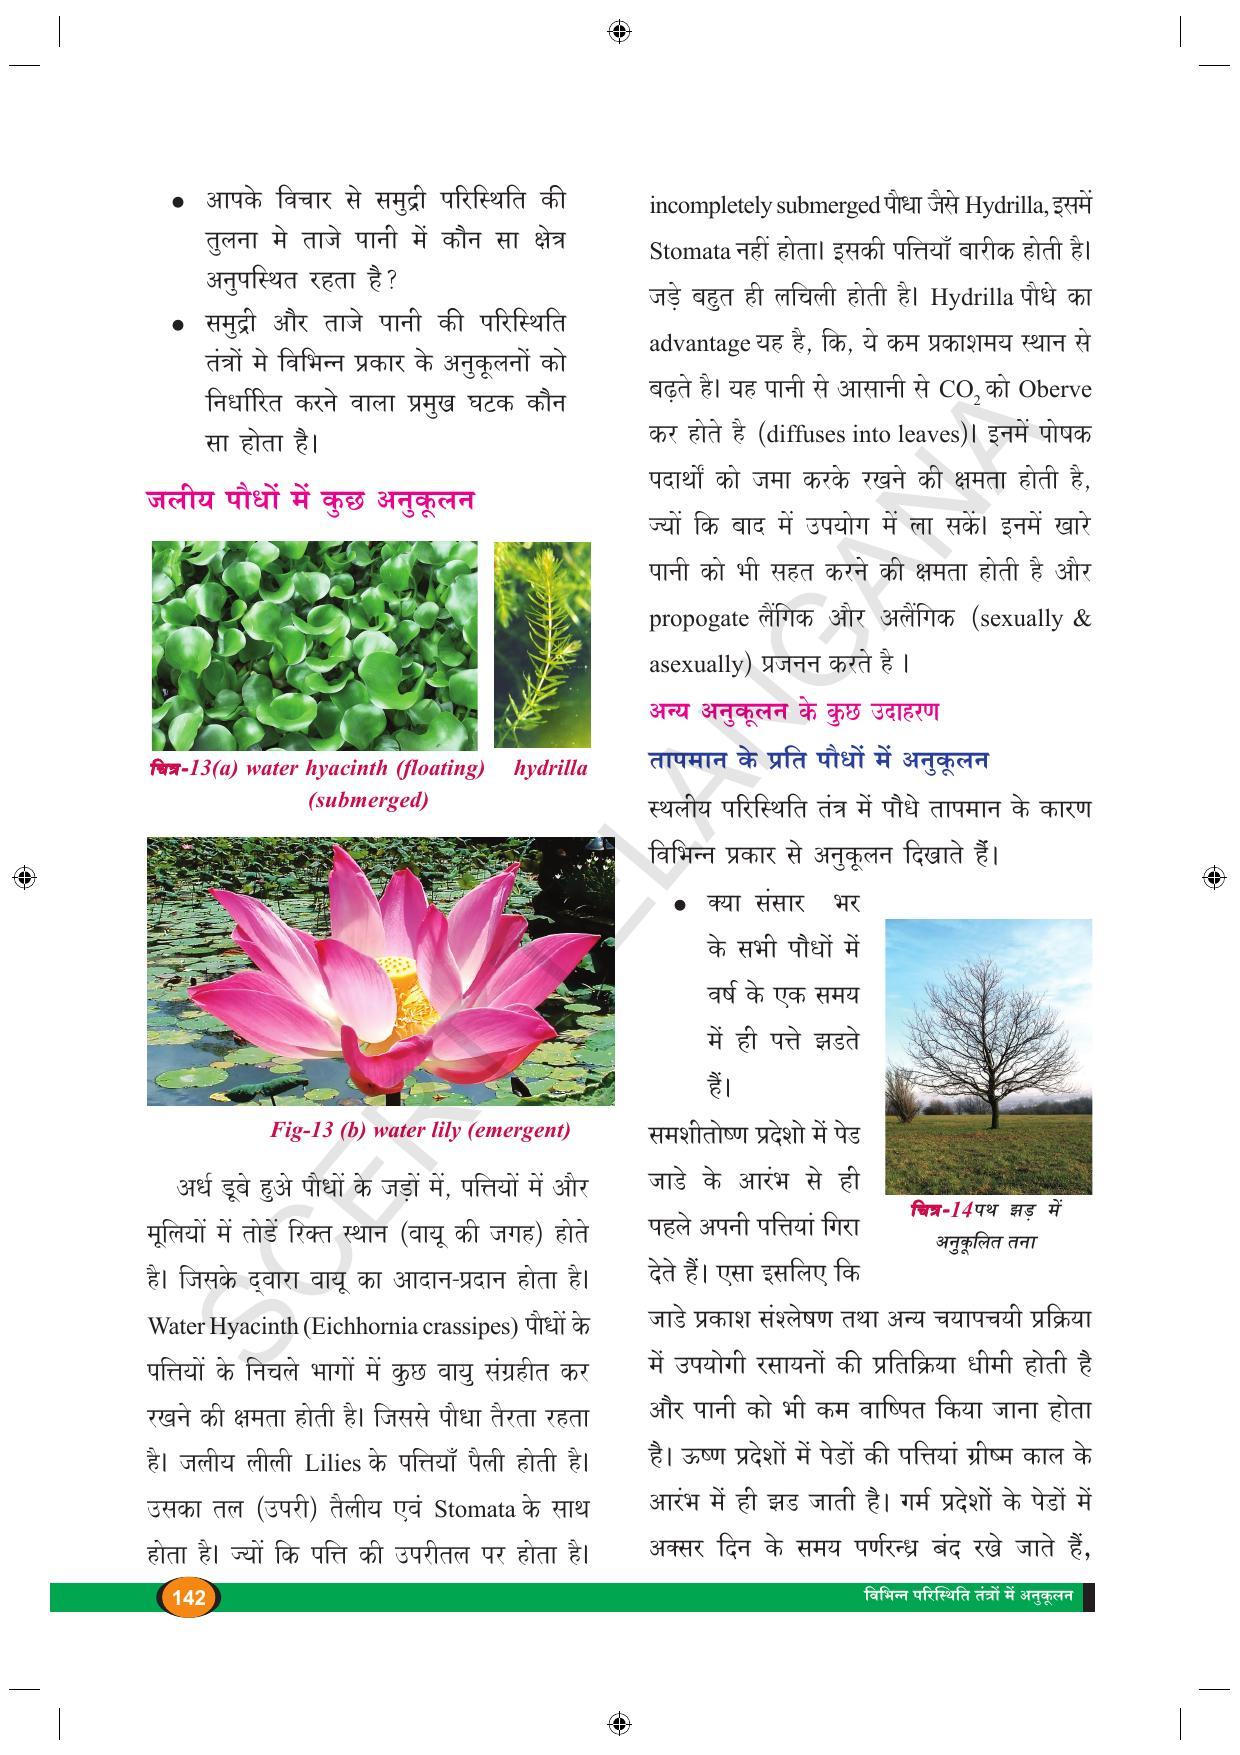 TS SCERT Class 9 Biological Science (Hindi Medium) Text Book - Page 154